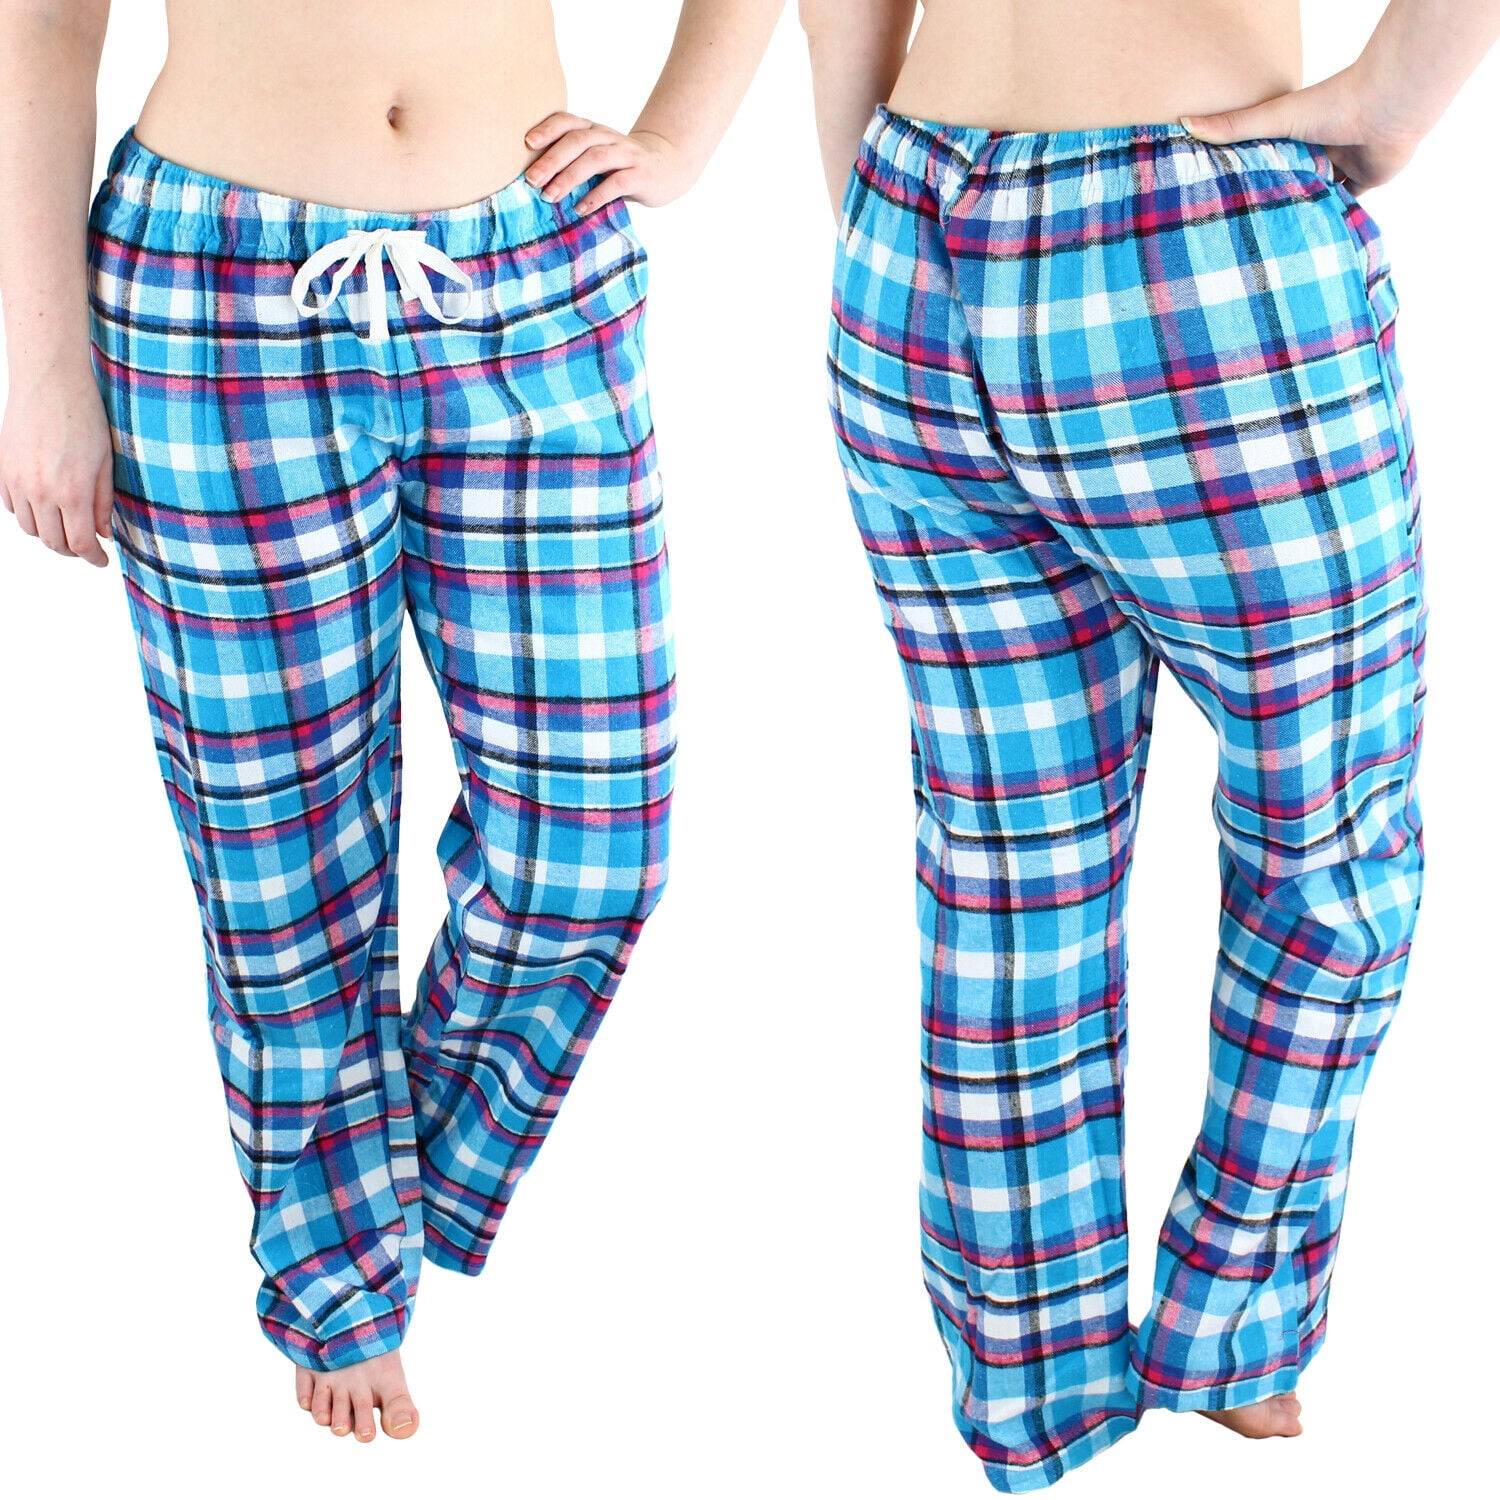 Comfy Lifestyle Women’s Plaid Pajama Pants, Soft and Lightweight Drawstring  Lounge Bottoms with Elastic Waistband, Turquoise Pink FL09, Small